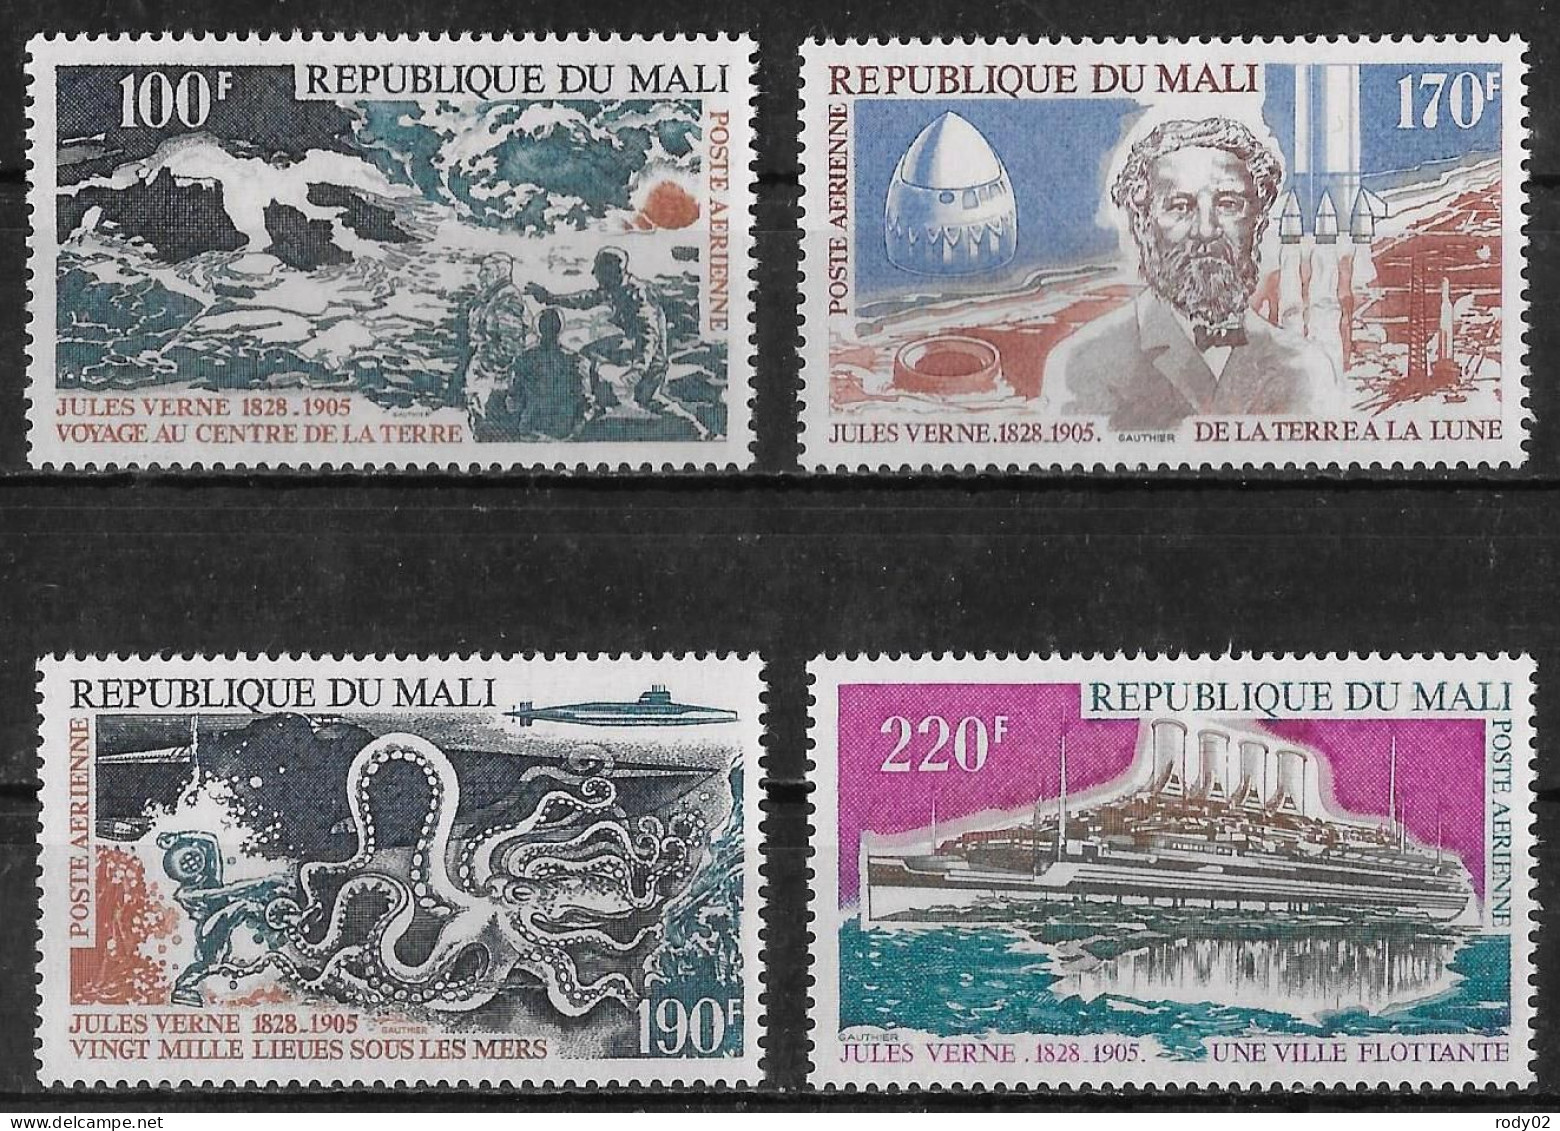 MALI - OEUVRES DE JULES VERNE - PA 239 A 242 - NEUF** MNH - Schrijvers